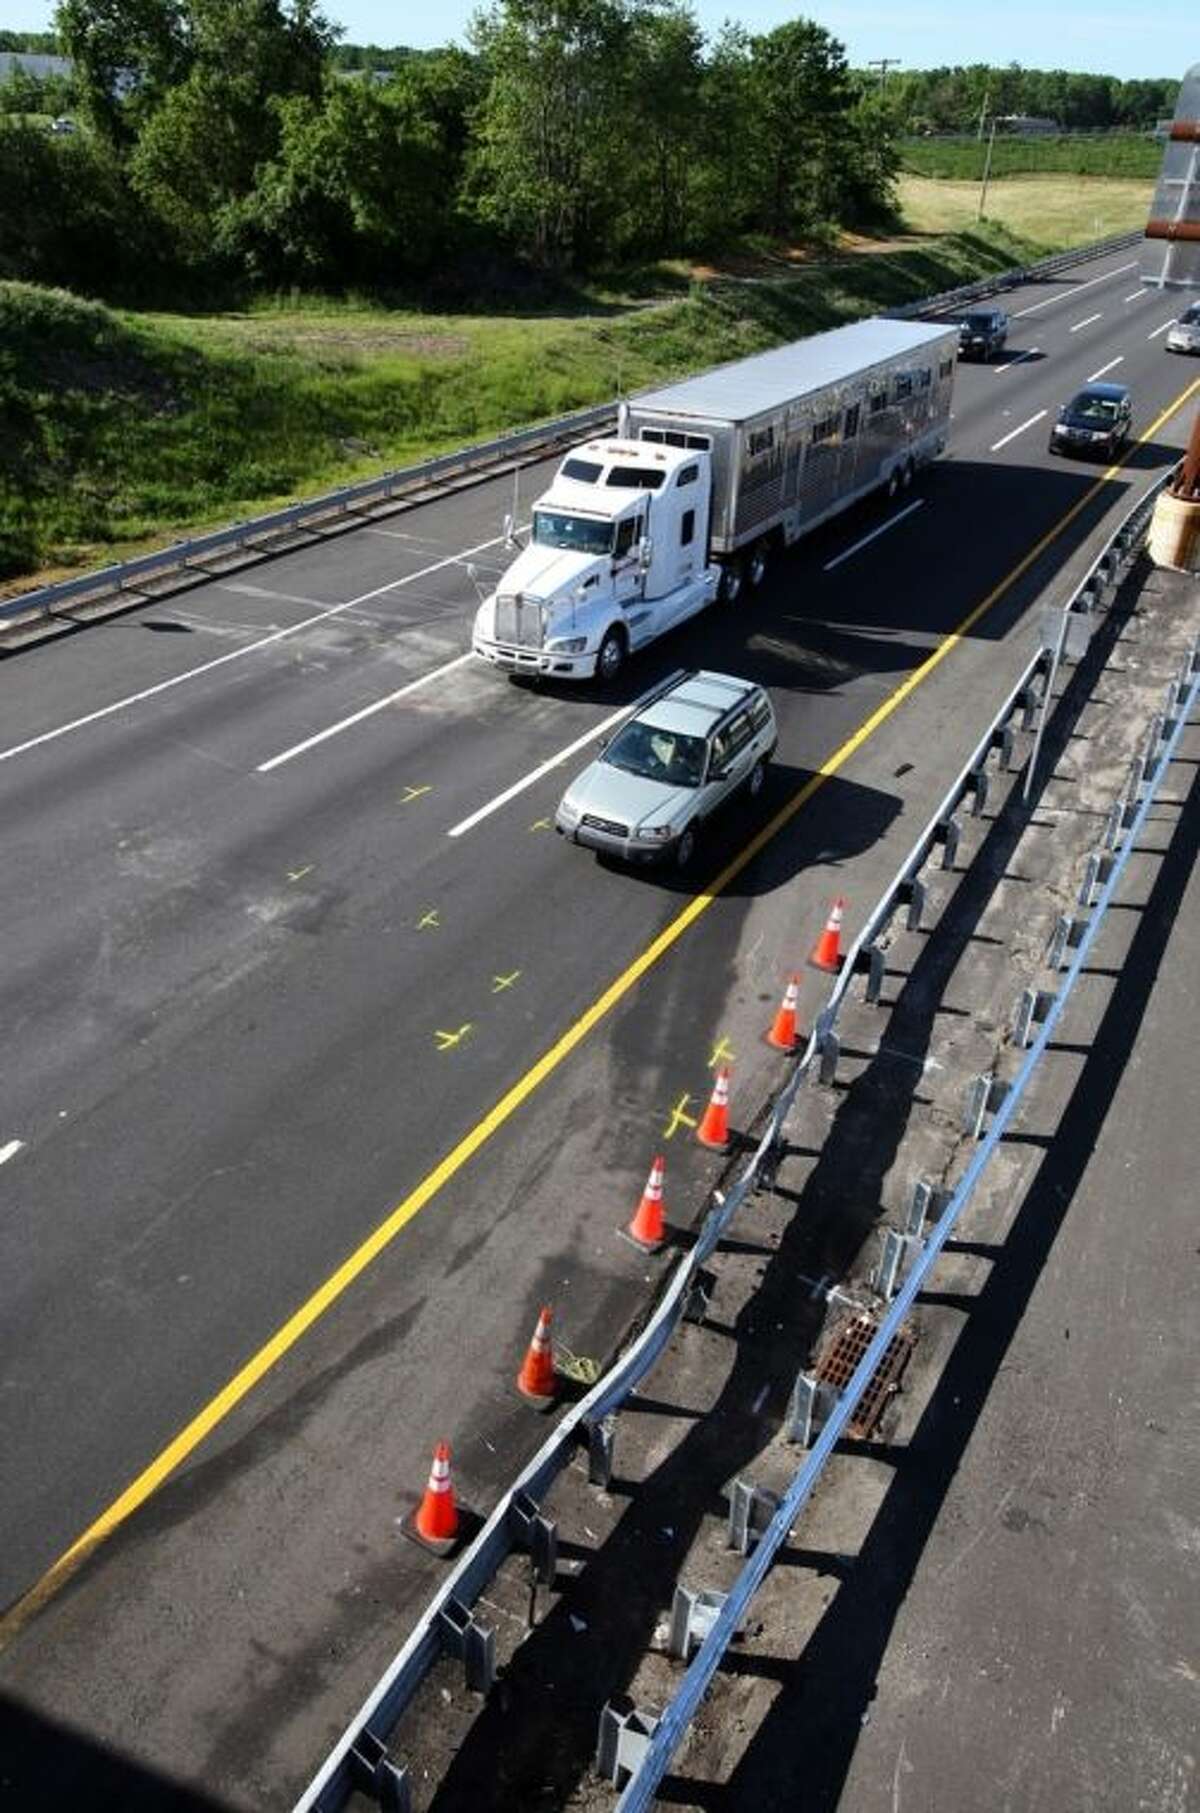 Traffic moves pass the scene of a serious accident at milepost 71 on the northbound lanes of New Jersey Turnpike on Saturday, June 7, 2014 near Cranbury, N.J. Comedian Tracy Morgan is in critical condition following an early morning accident on the New Jersey Turnpike. The comedian was injured in a crash involving six vehicles that left at least one person dead and several others, including Morgan, with serious injuries. (AP Photo/David Gard)